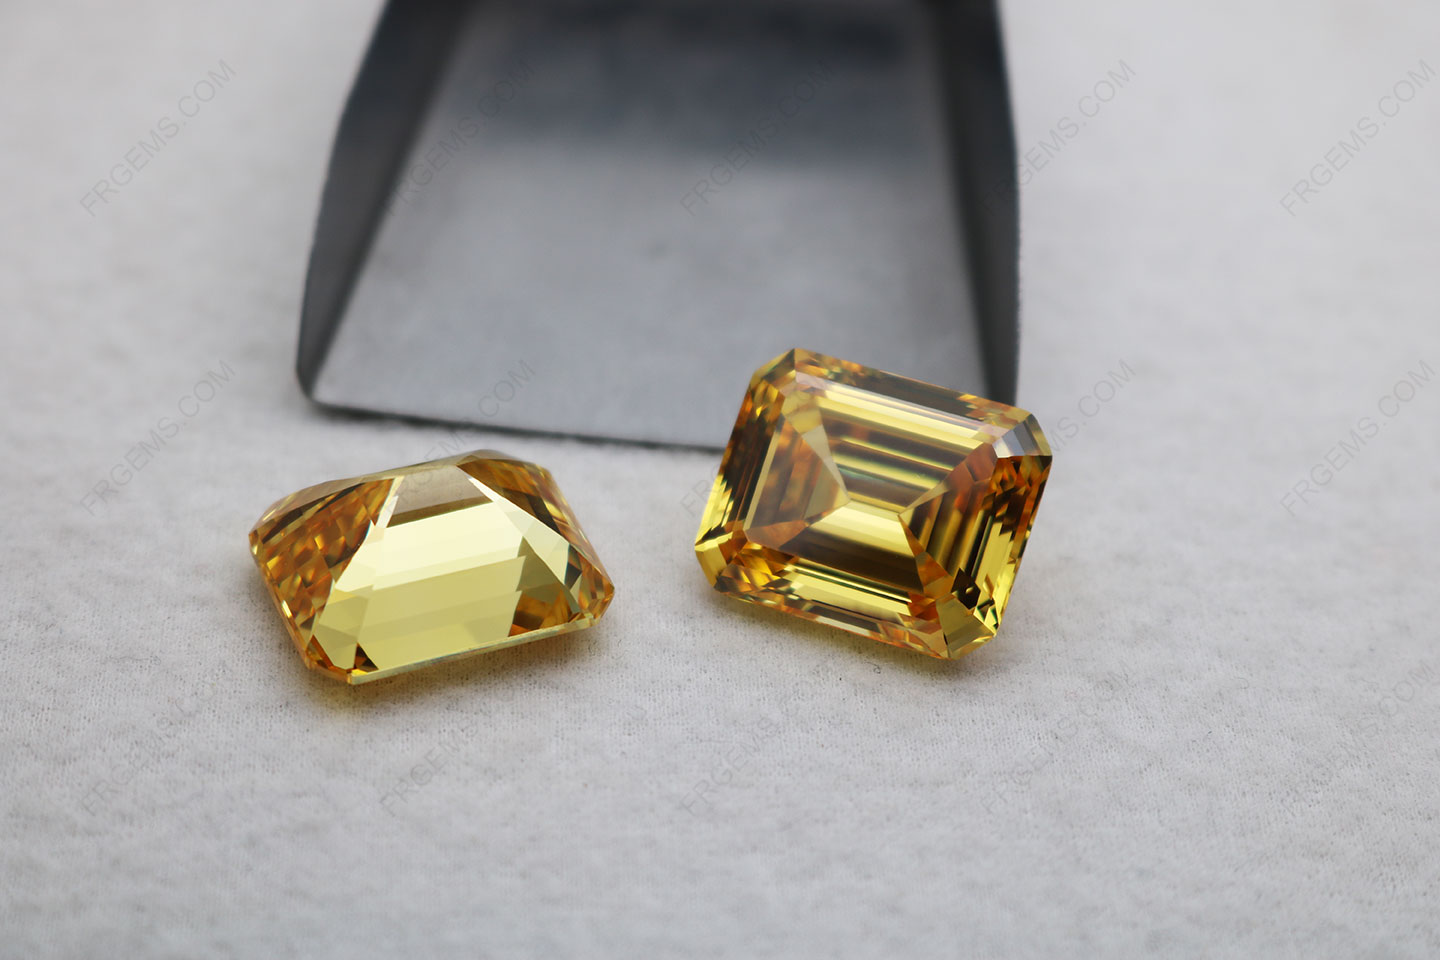 Wholesale Best quality of Canary Yellow color Cubic Zirconia Asscher cut 20.5x17mm Gemstones